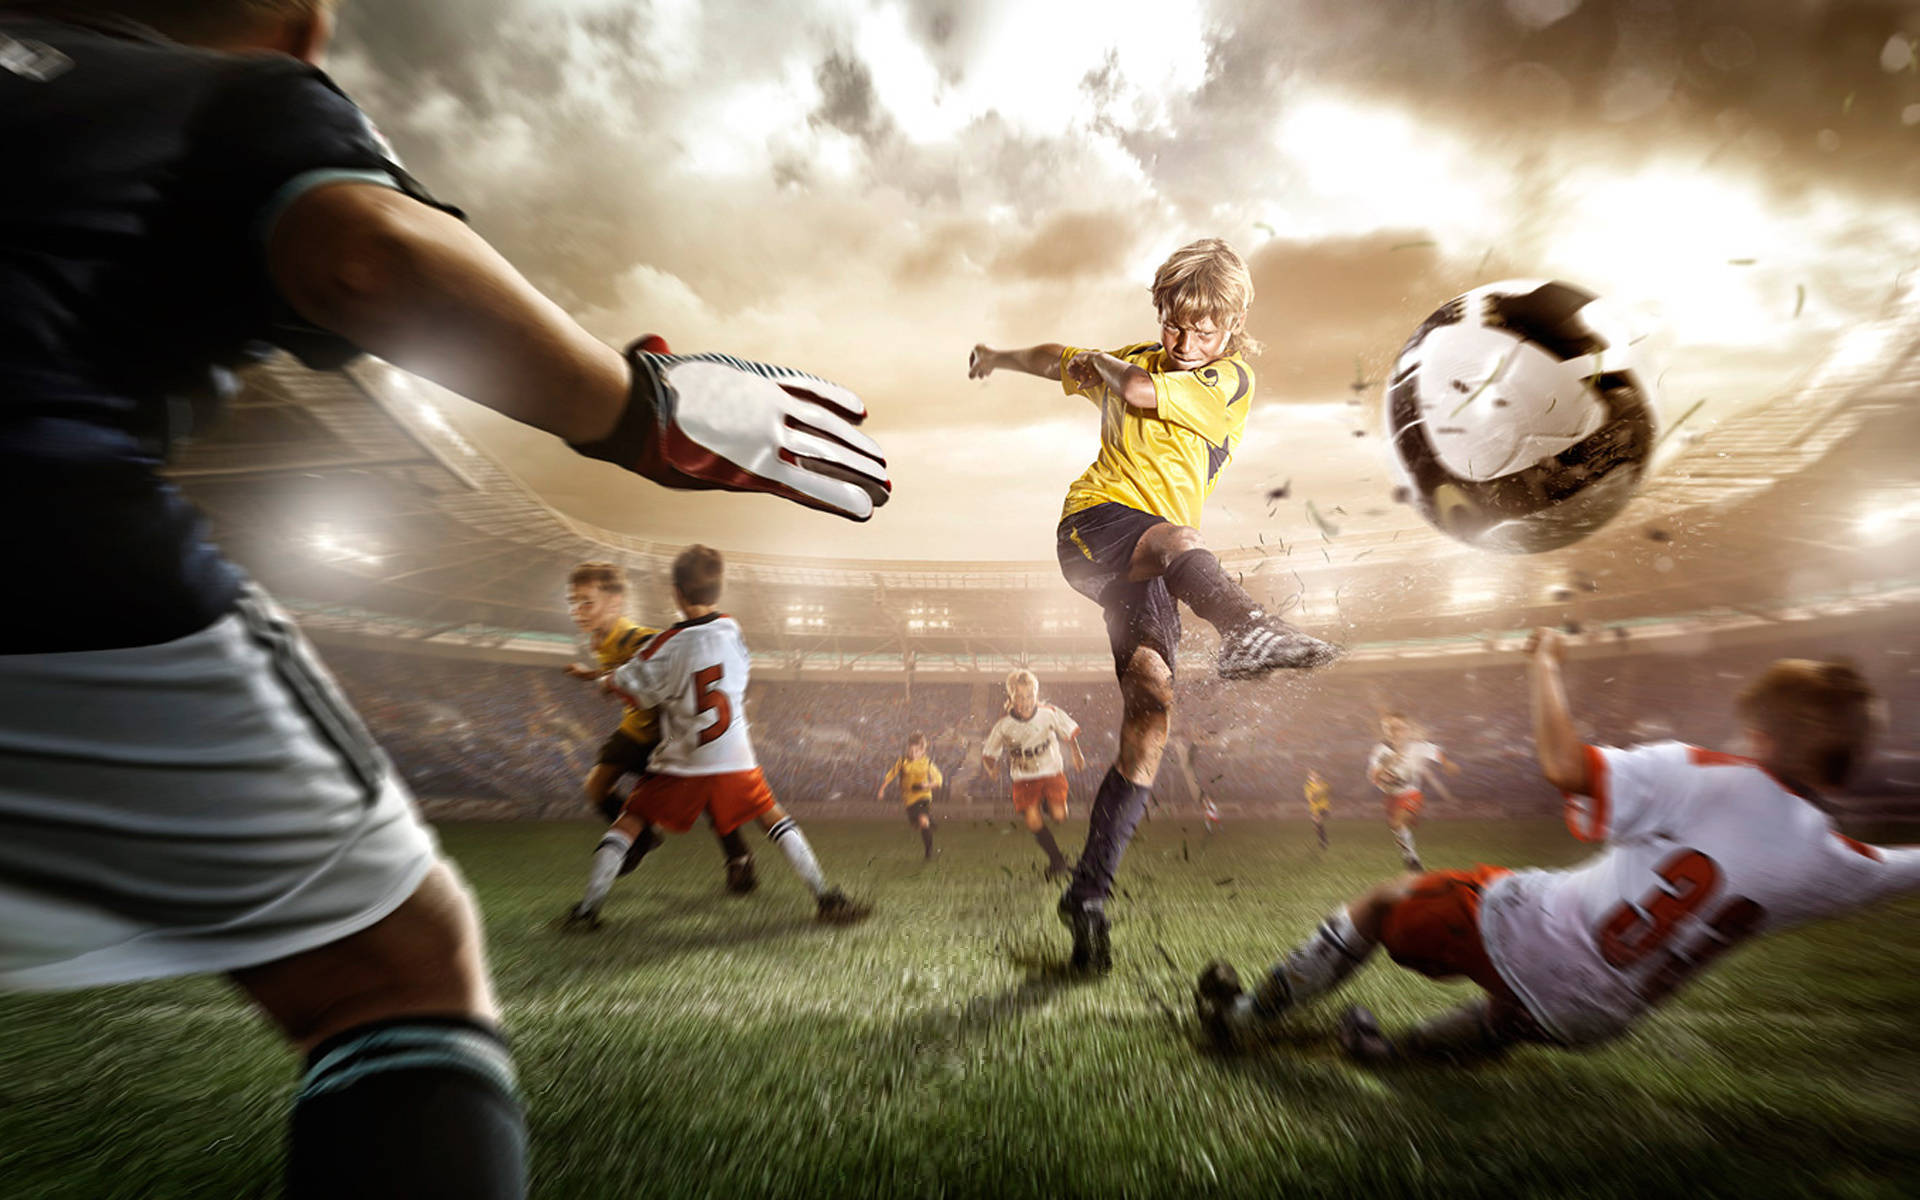 Cool Soccer Game Painting Wallpaper